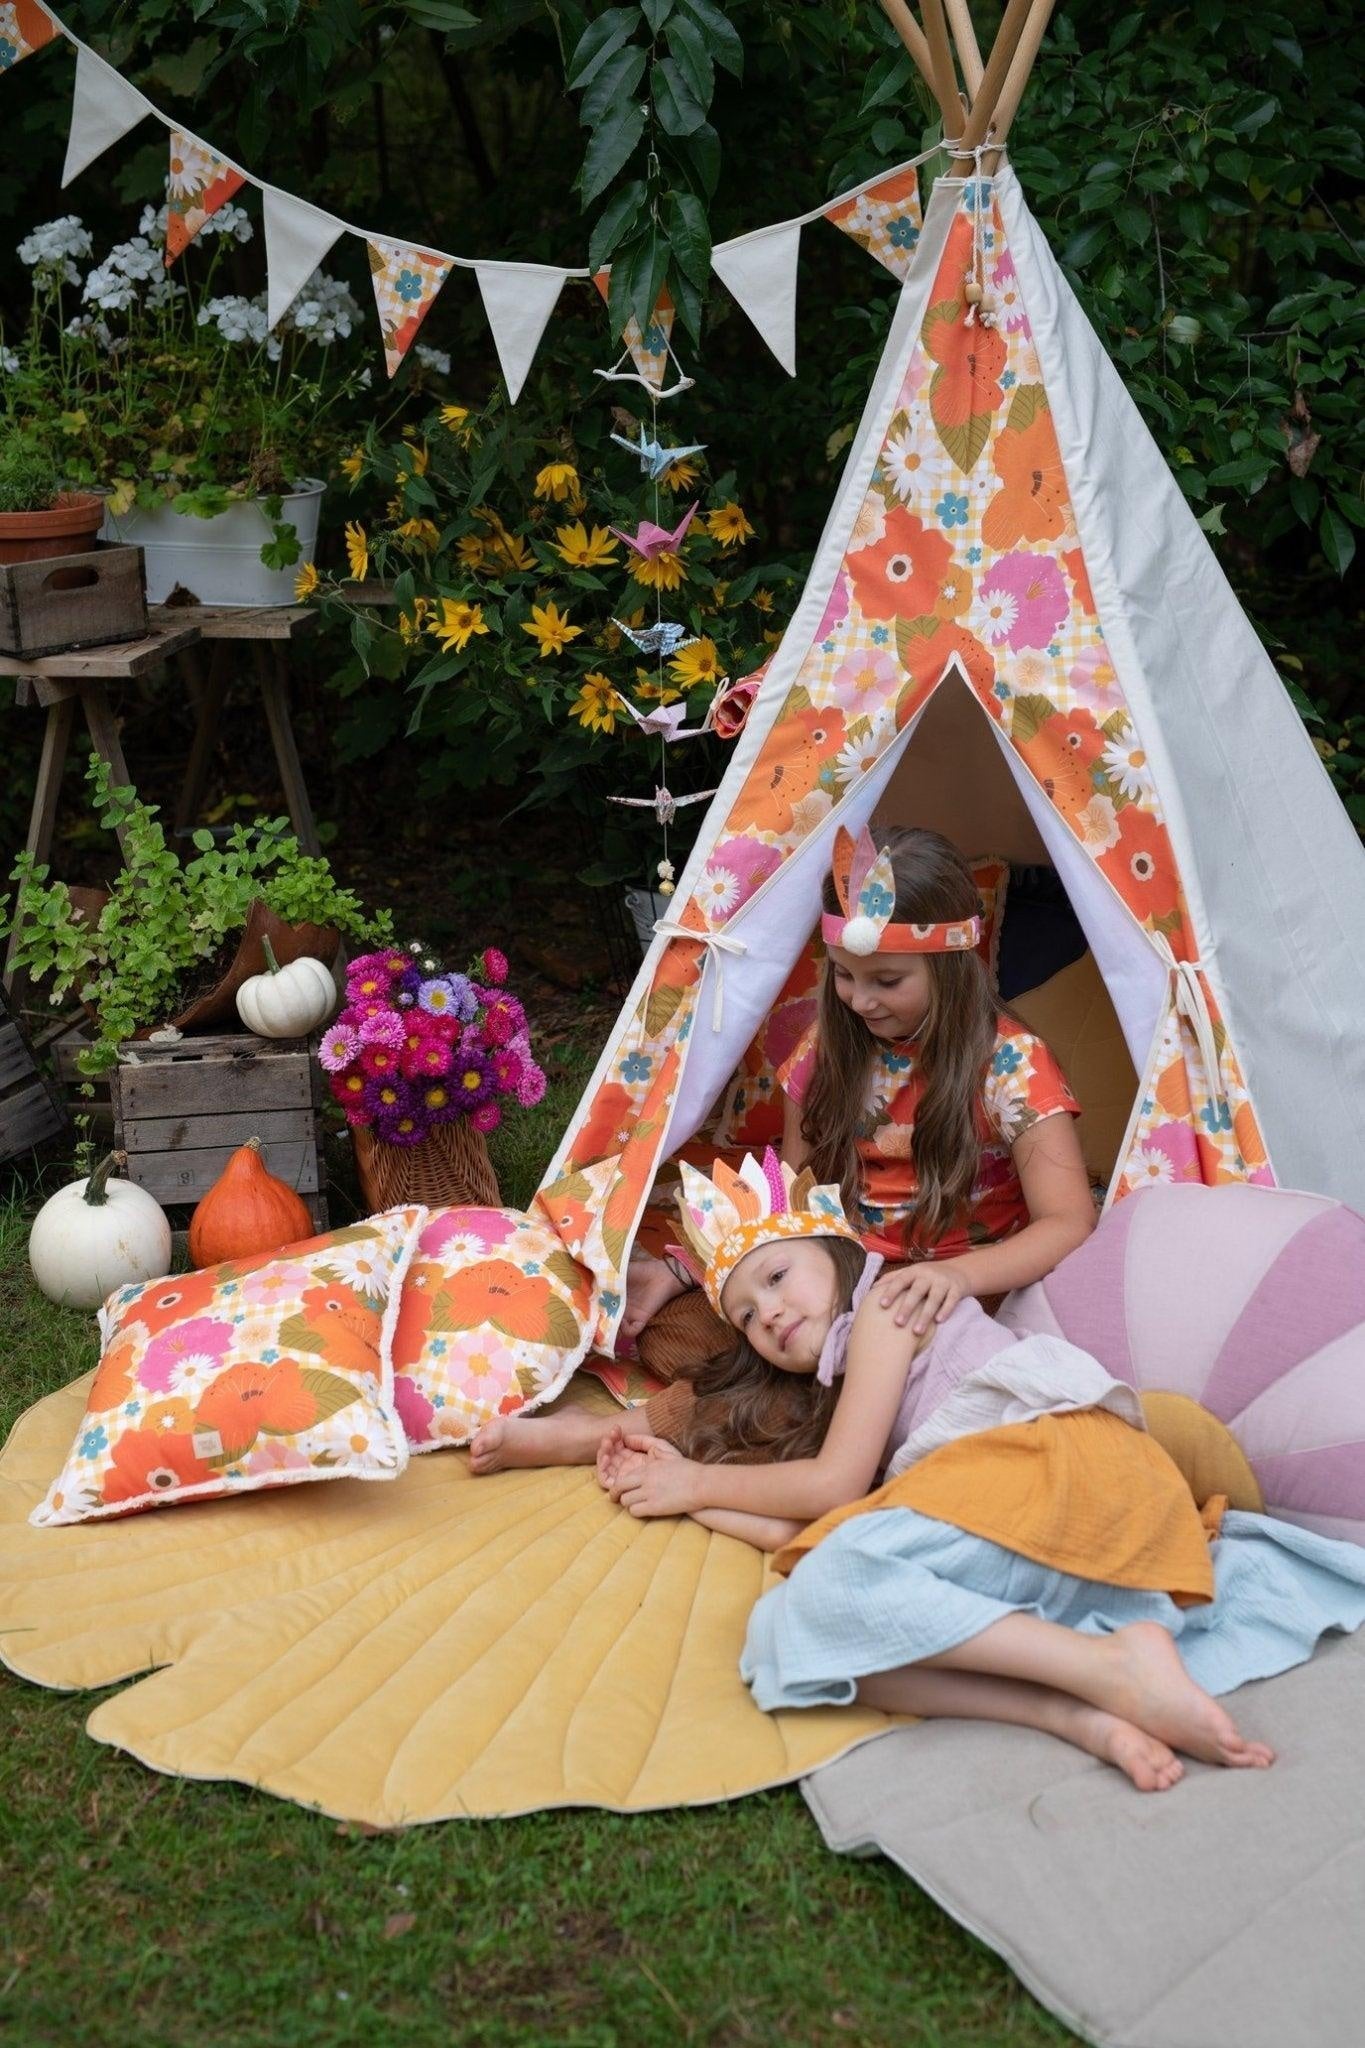 “Picnic with the flowers” Teepee Tent - Moi Mili